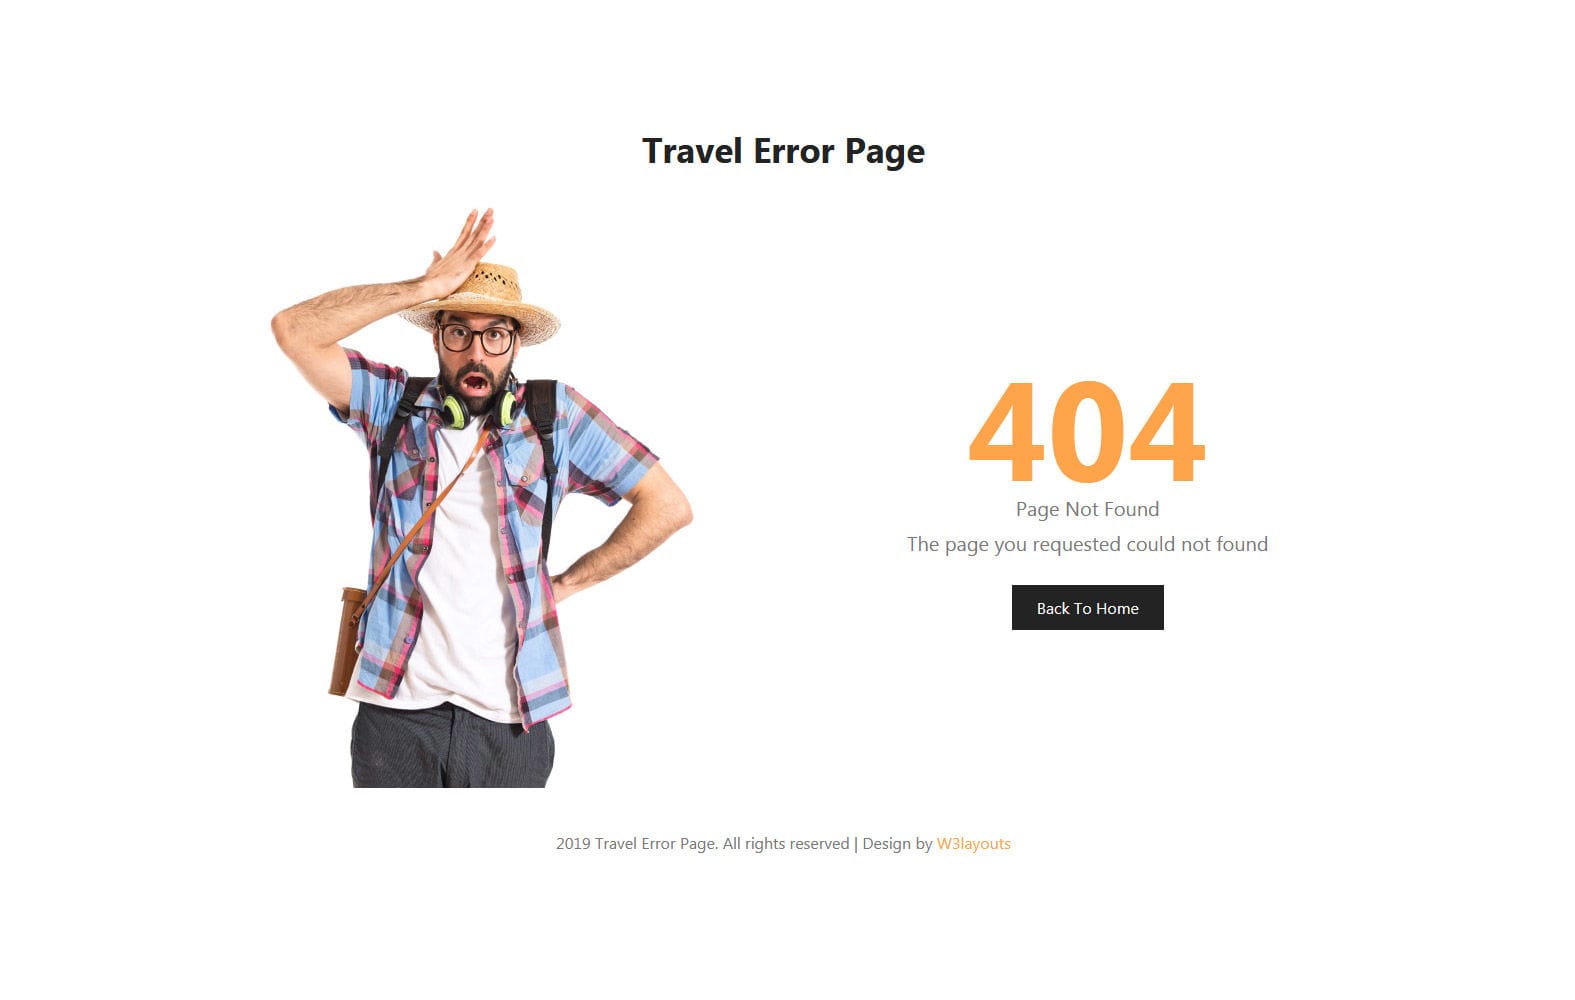 Travel error page featured image